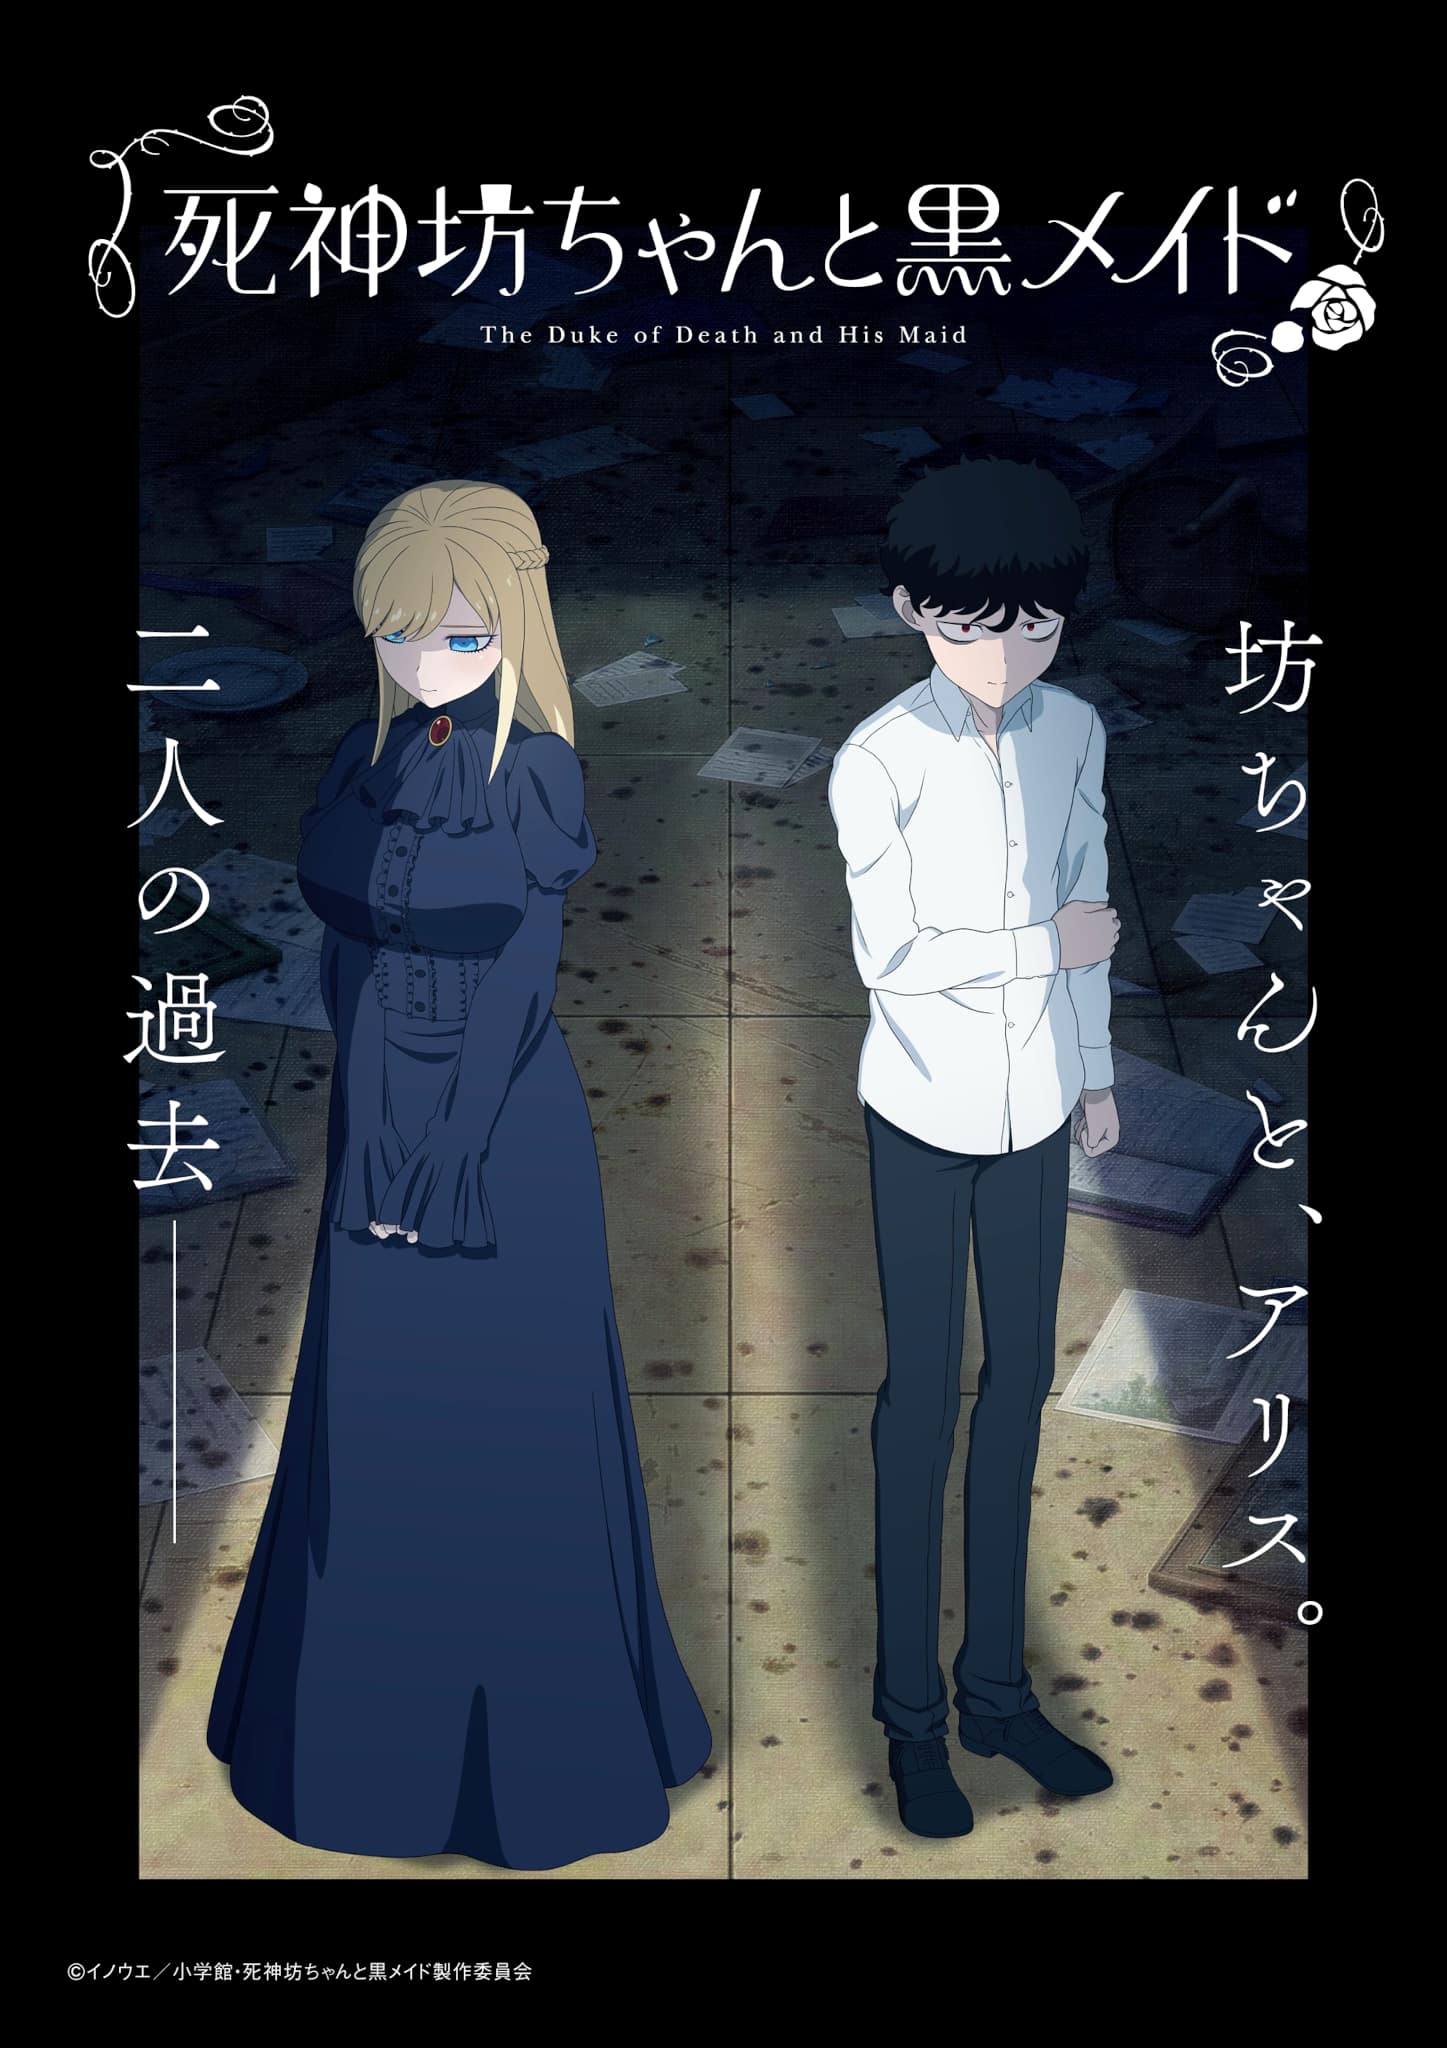 Annonce dune suite pour anime The Duke of Death and His Maid